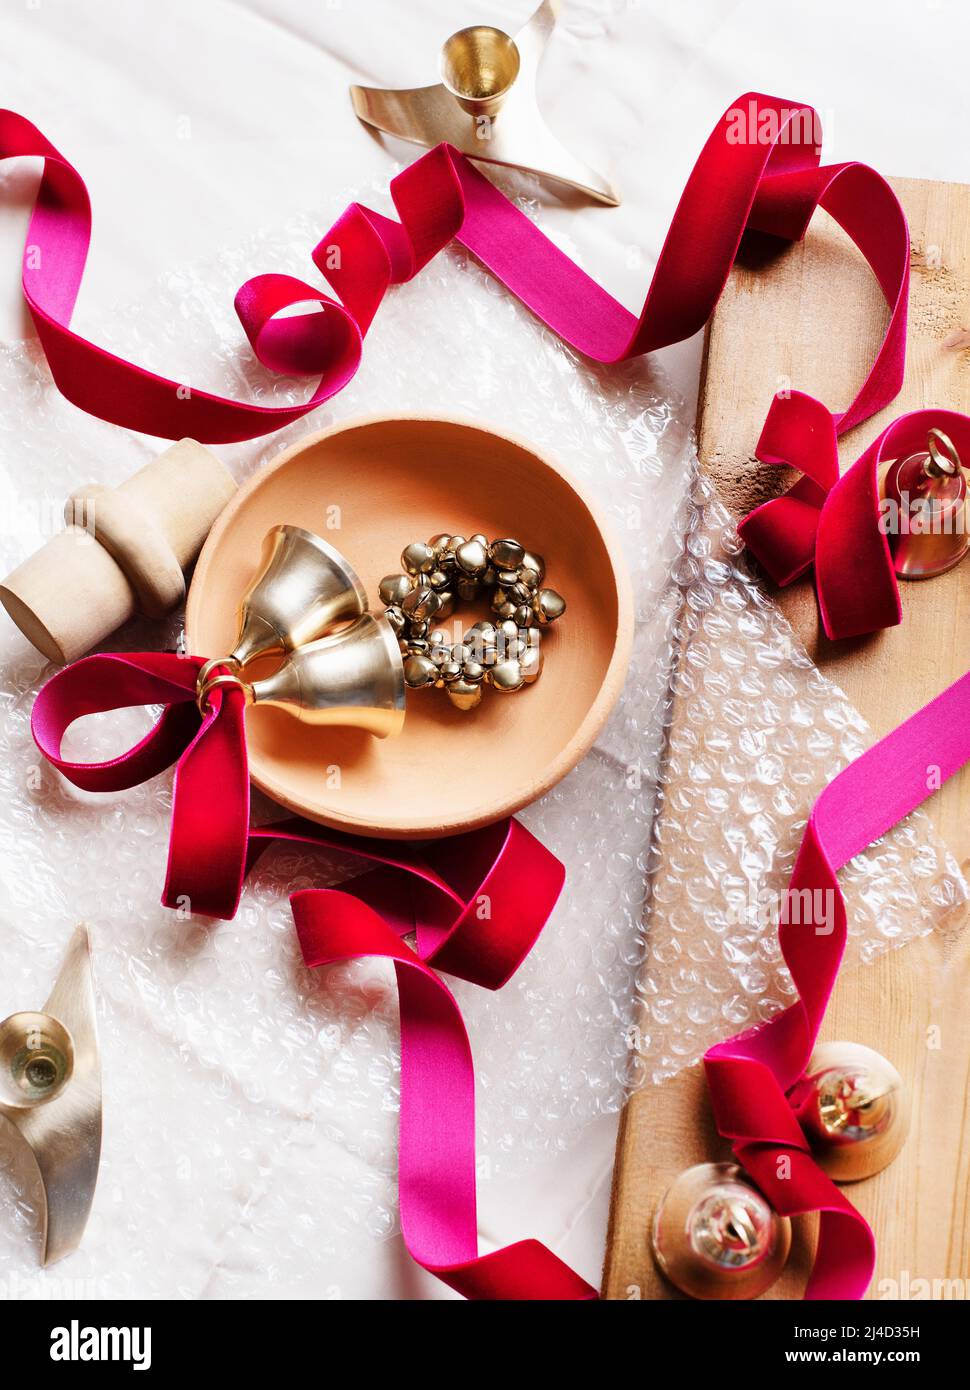 Still life with Christmas decorations Stock Photo